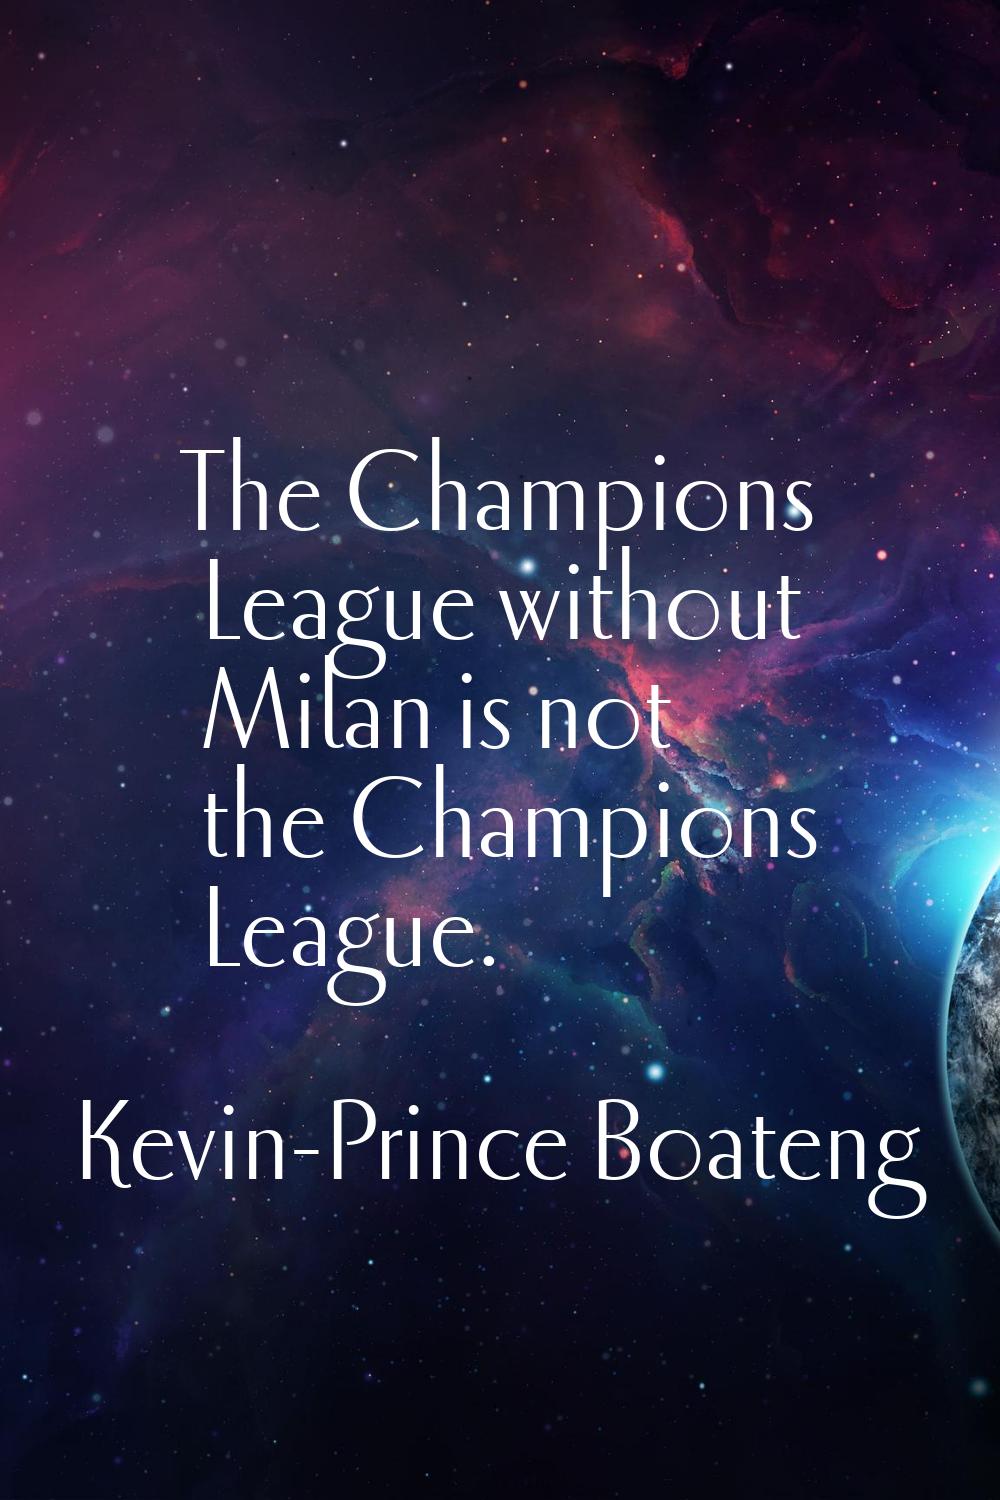 The Champions League without Milan is not the Champions League.